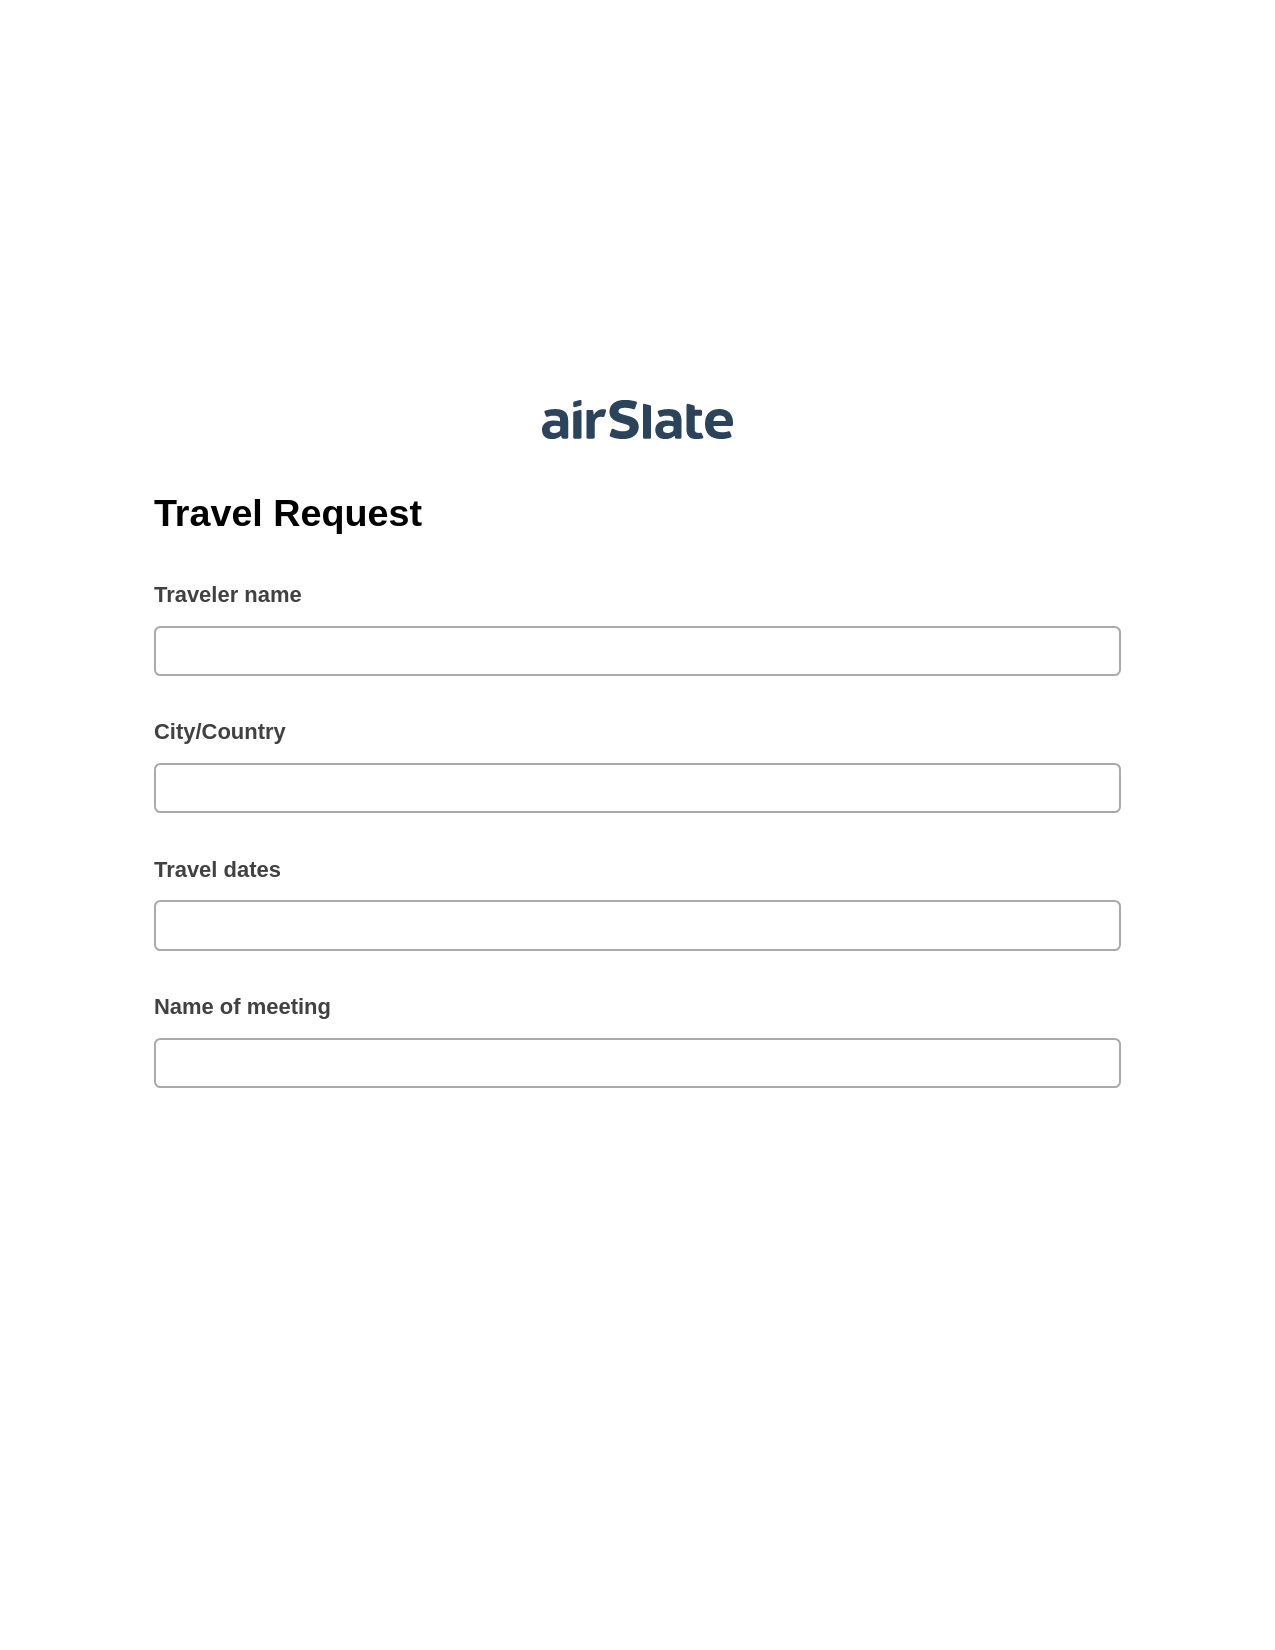 Travel Request Pre-fill Document Bot, Create NetSuite Records Bot, Export to Google Sheet Bot